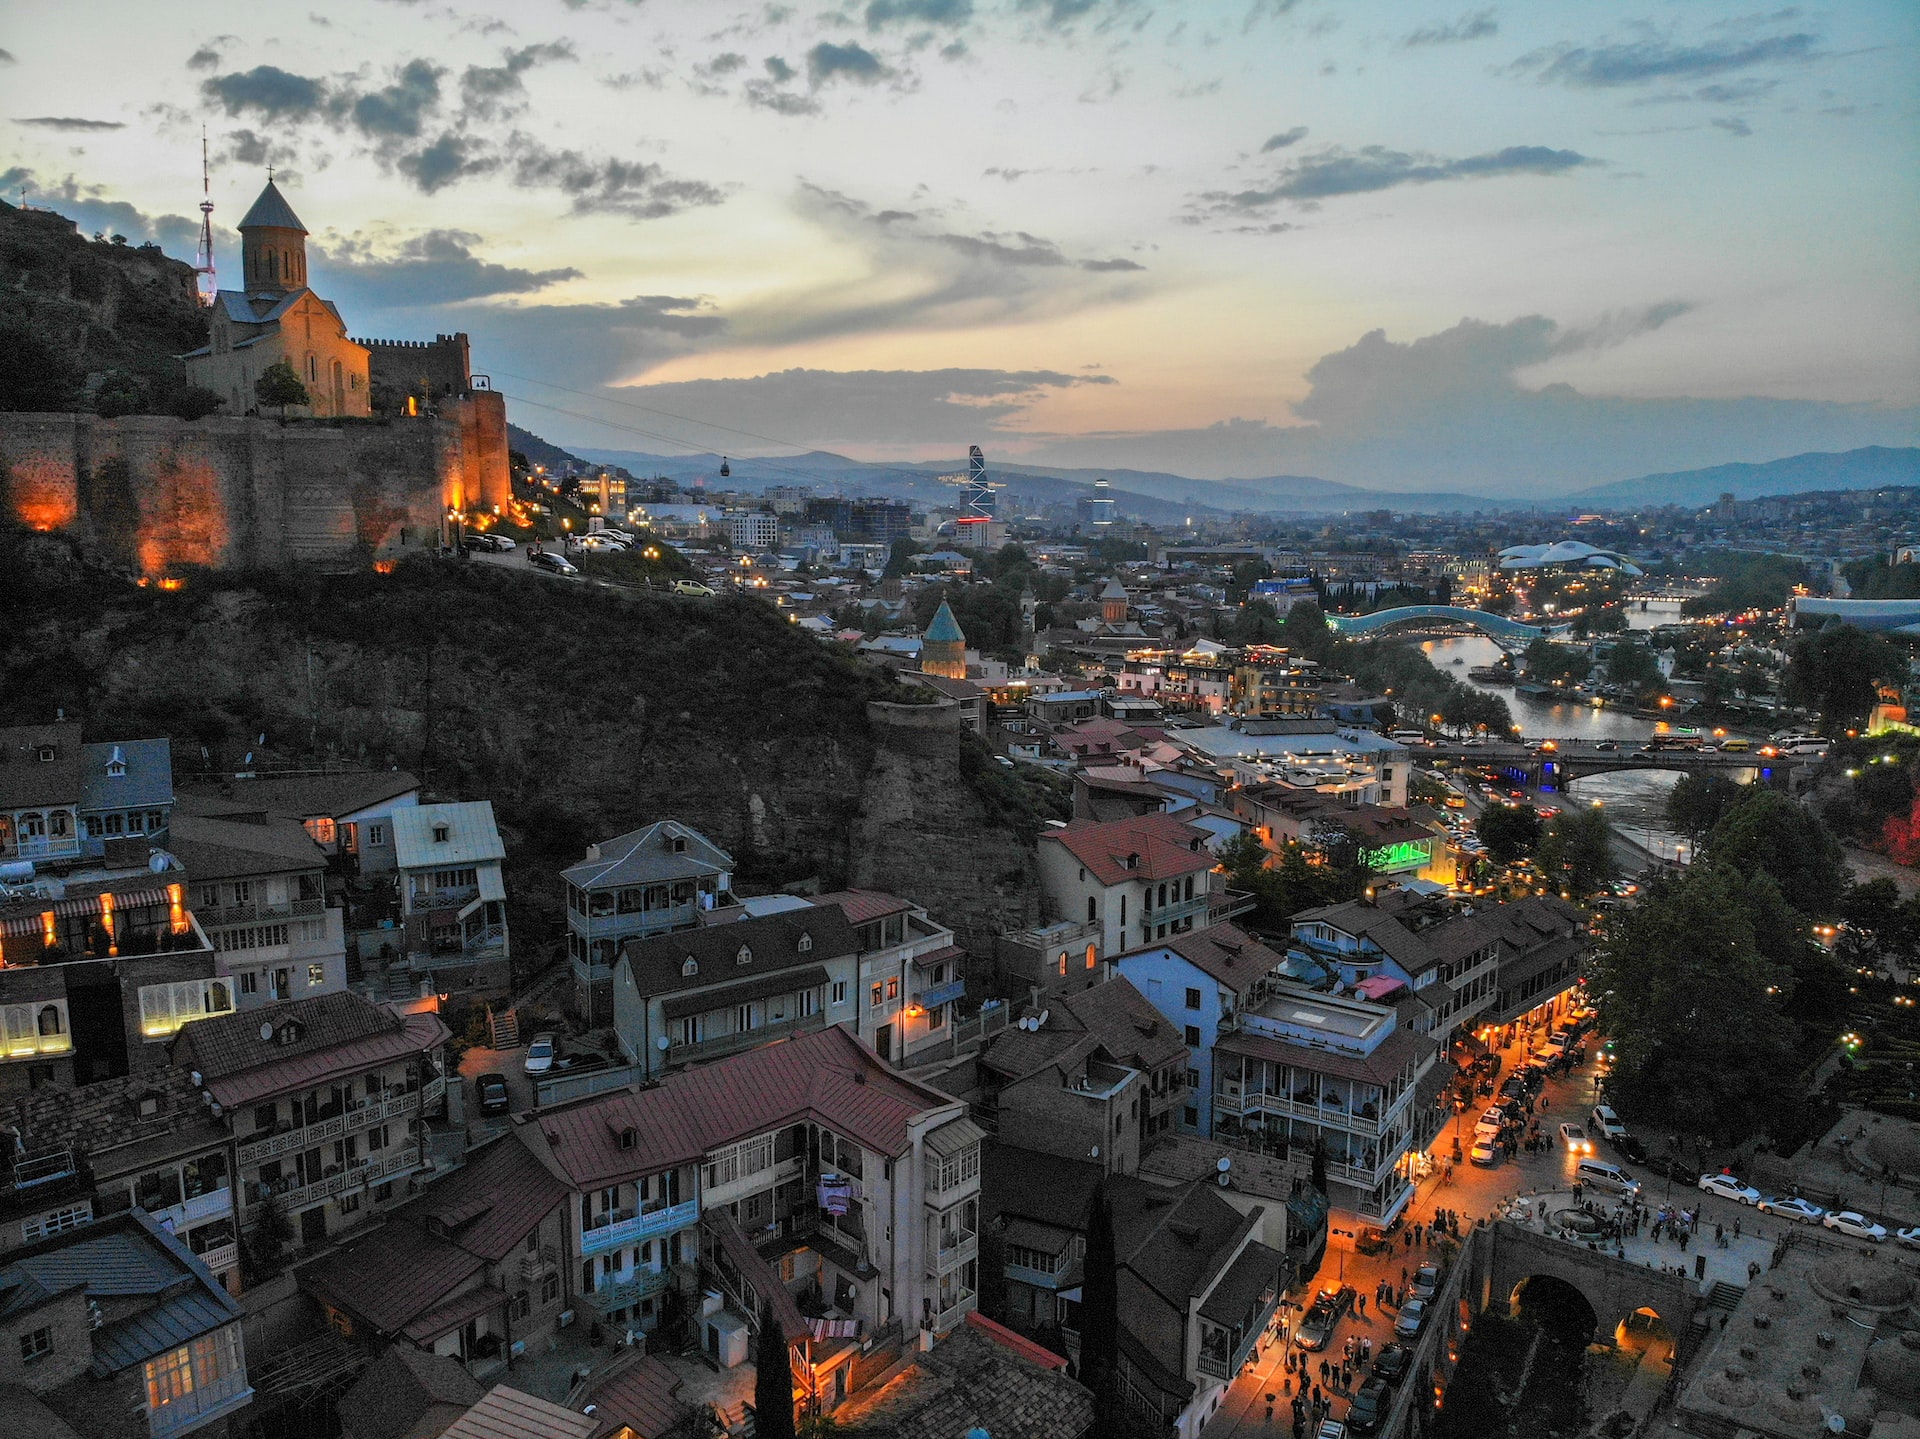 Top 5 Interesting Things to Do in Tbilisi, Georgia